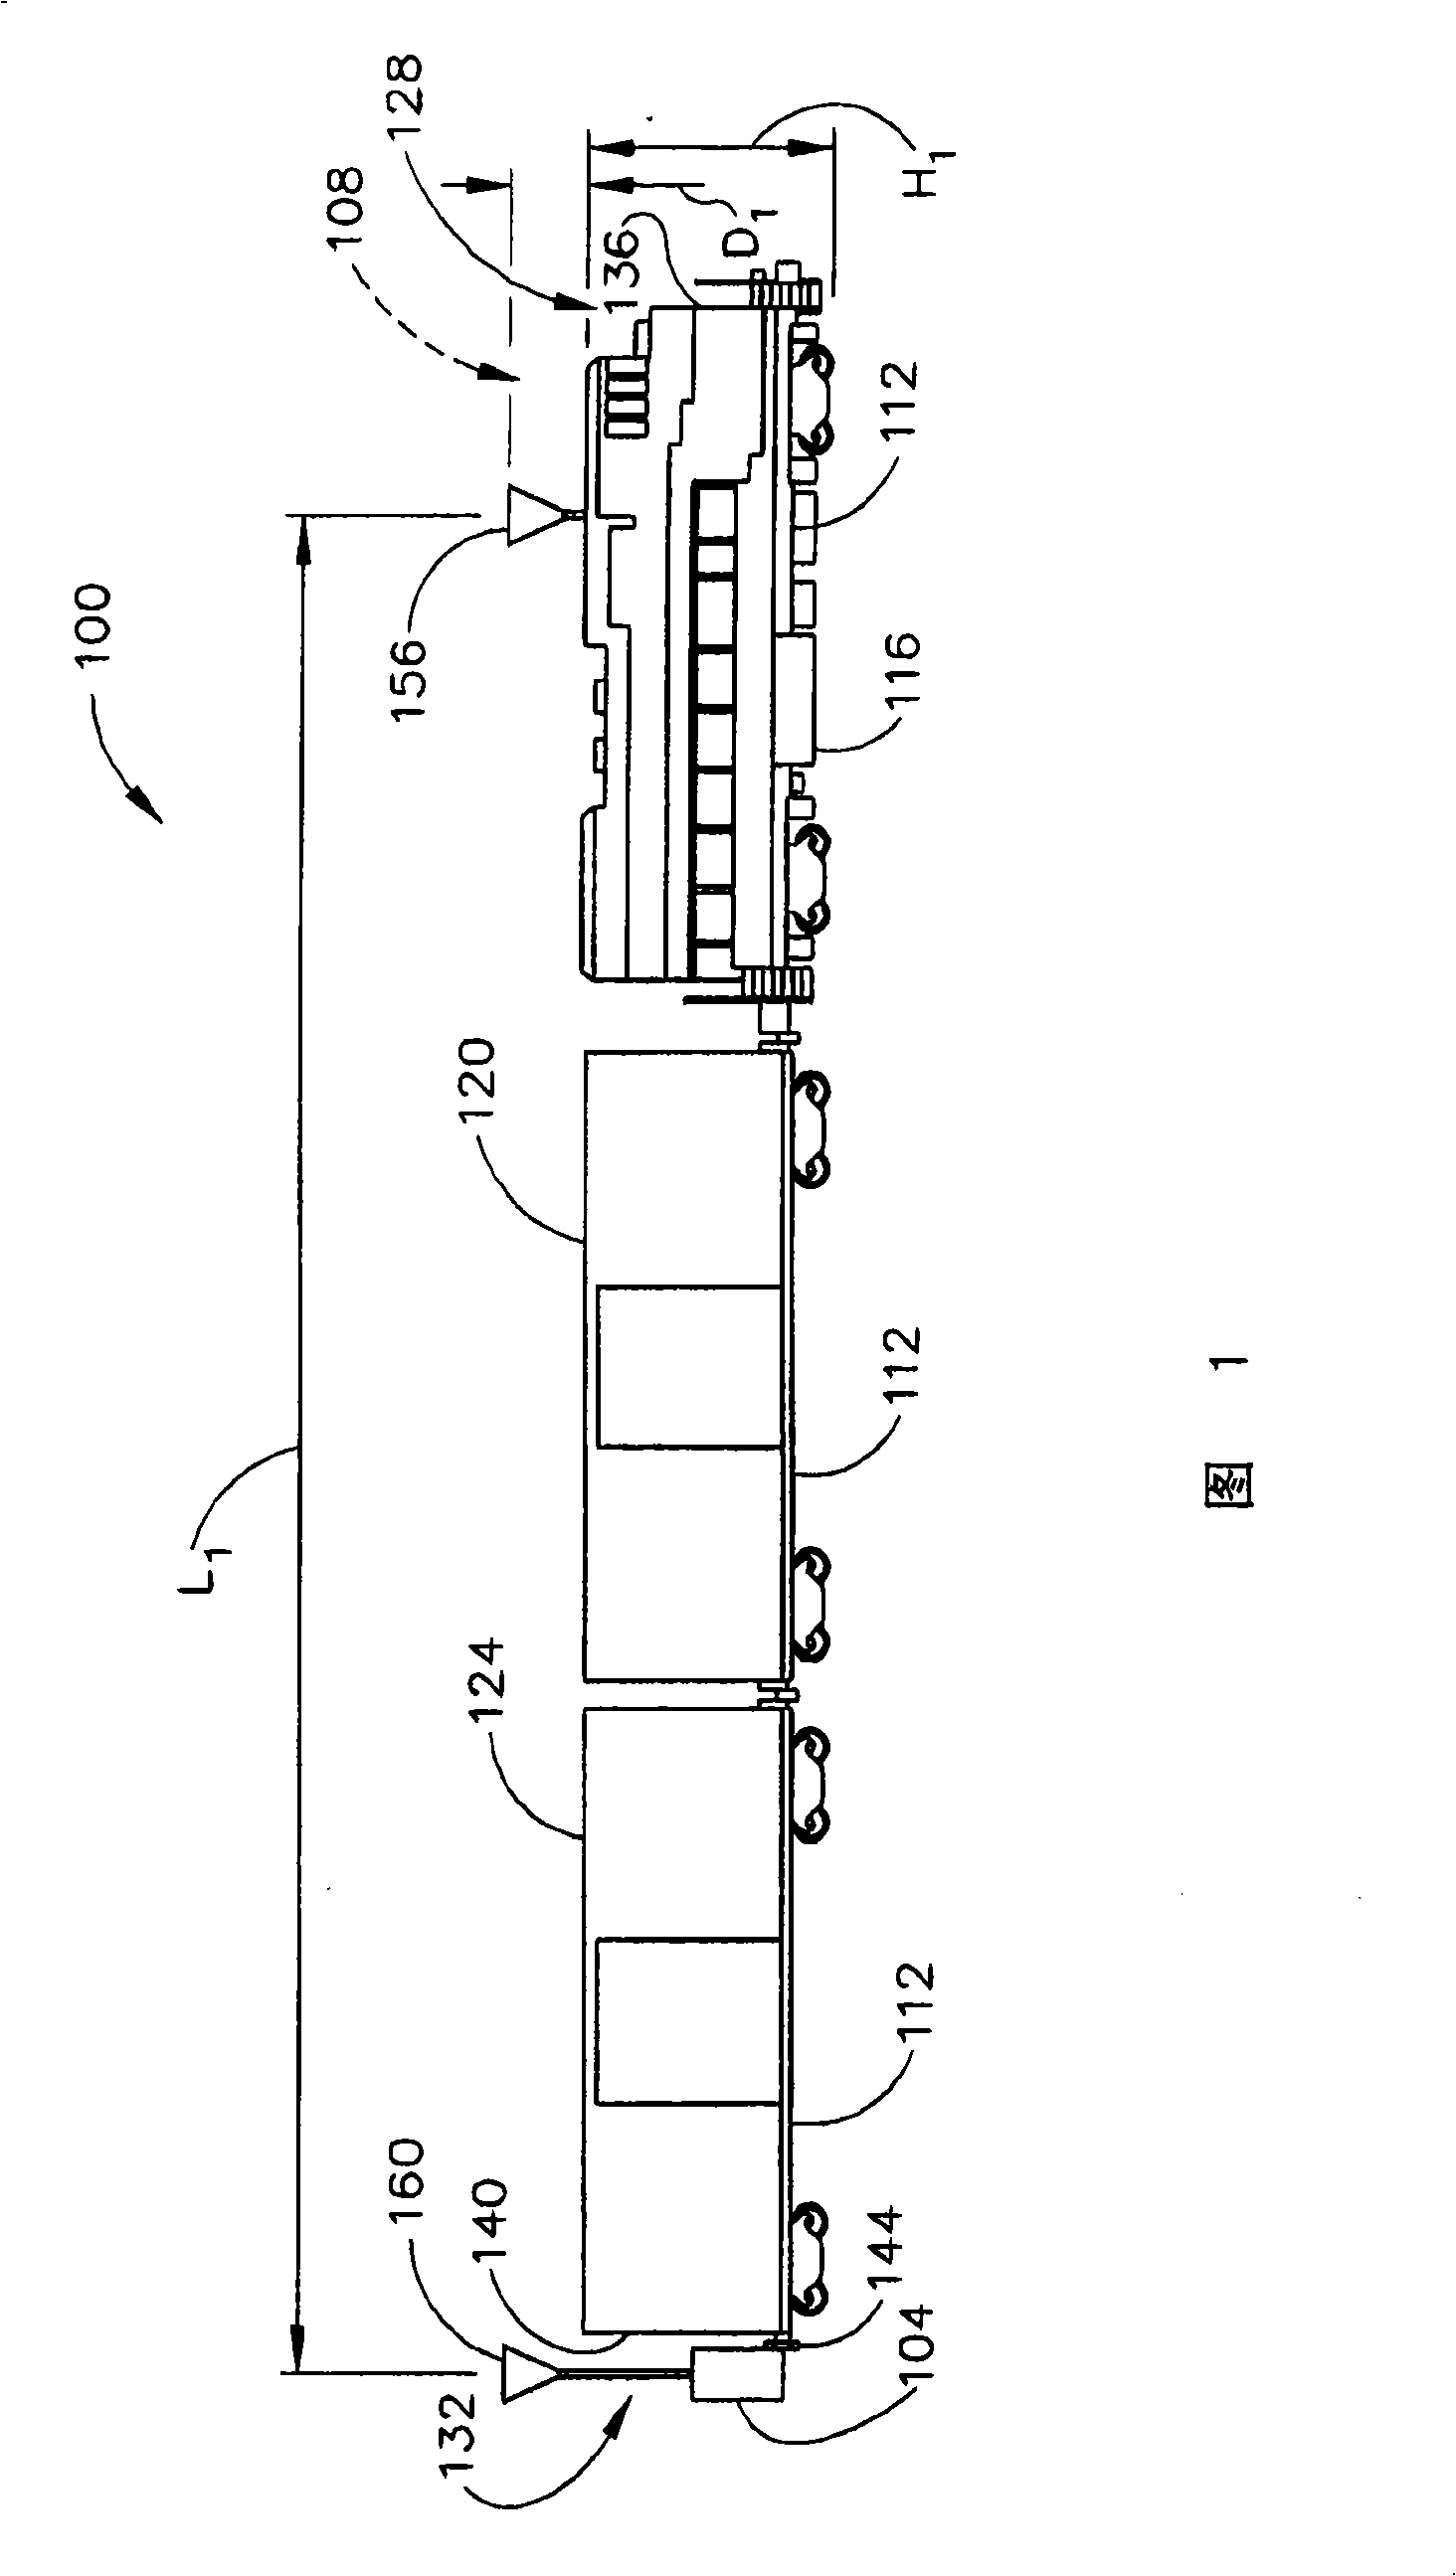 Methods and systems for determining an integrity of a train